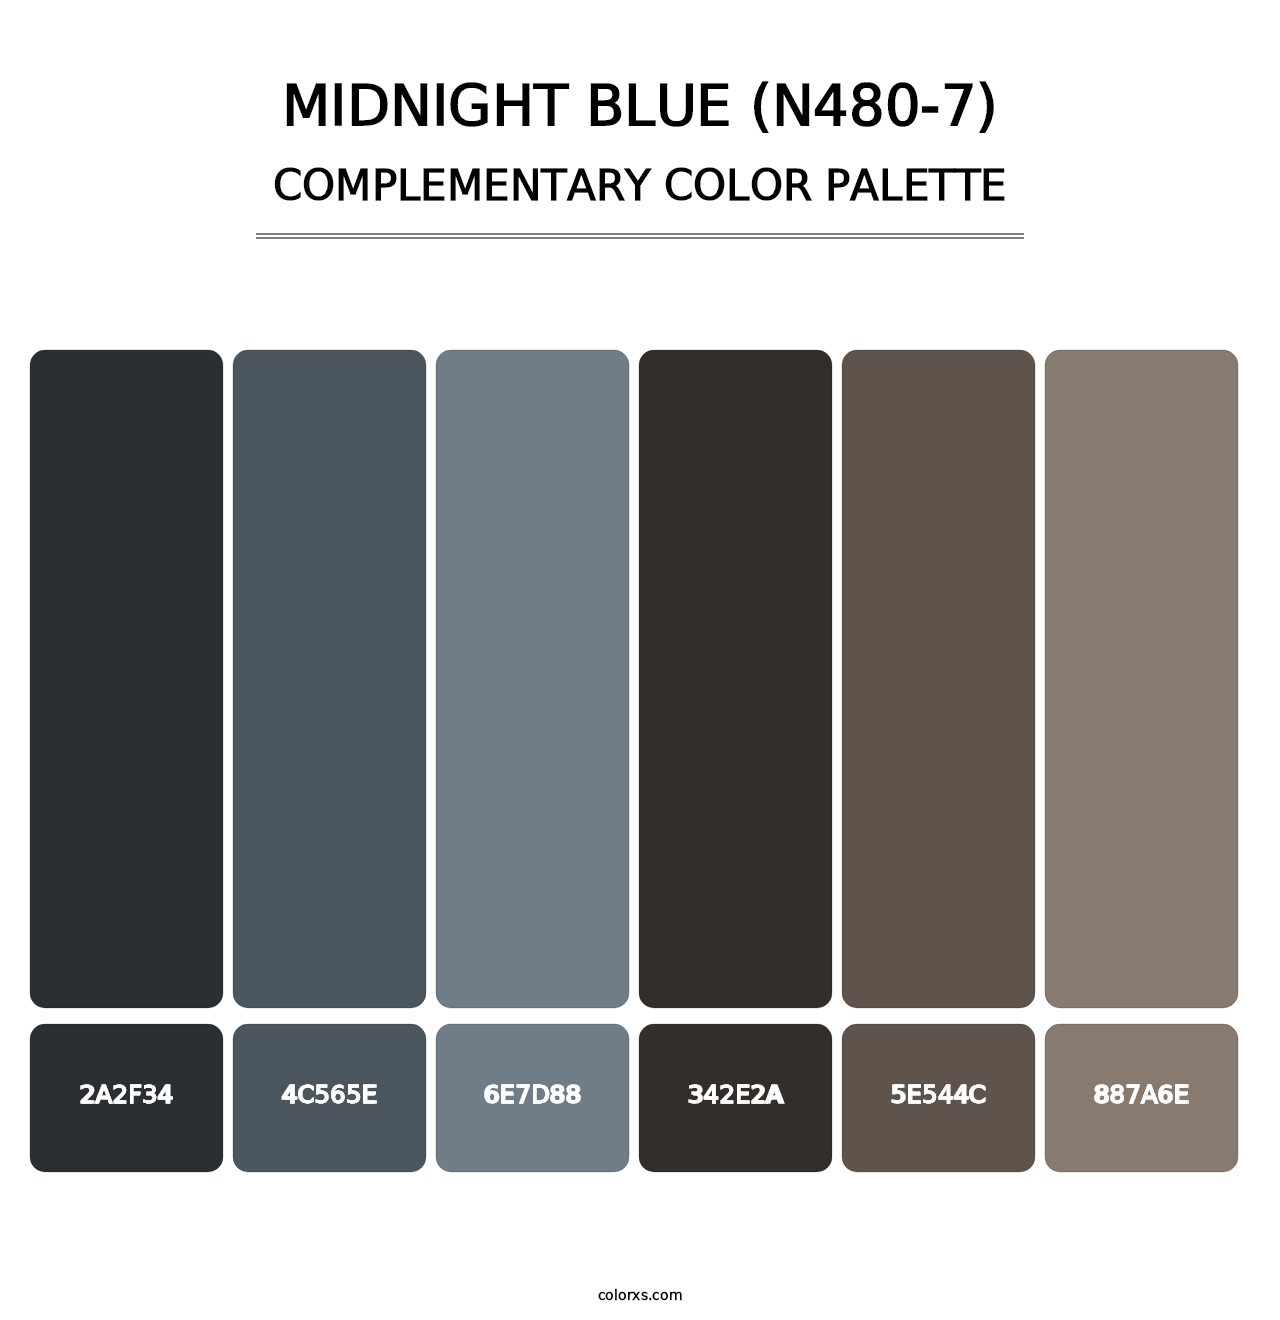 Midnight Blue (N480-7) - Complementary Color Palette